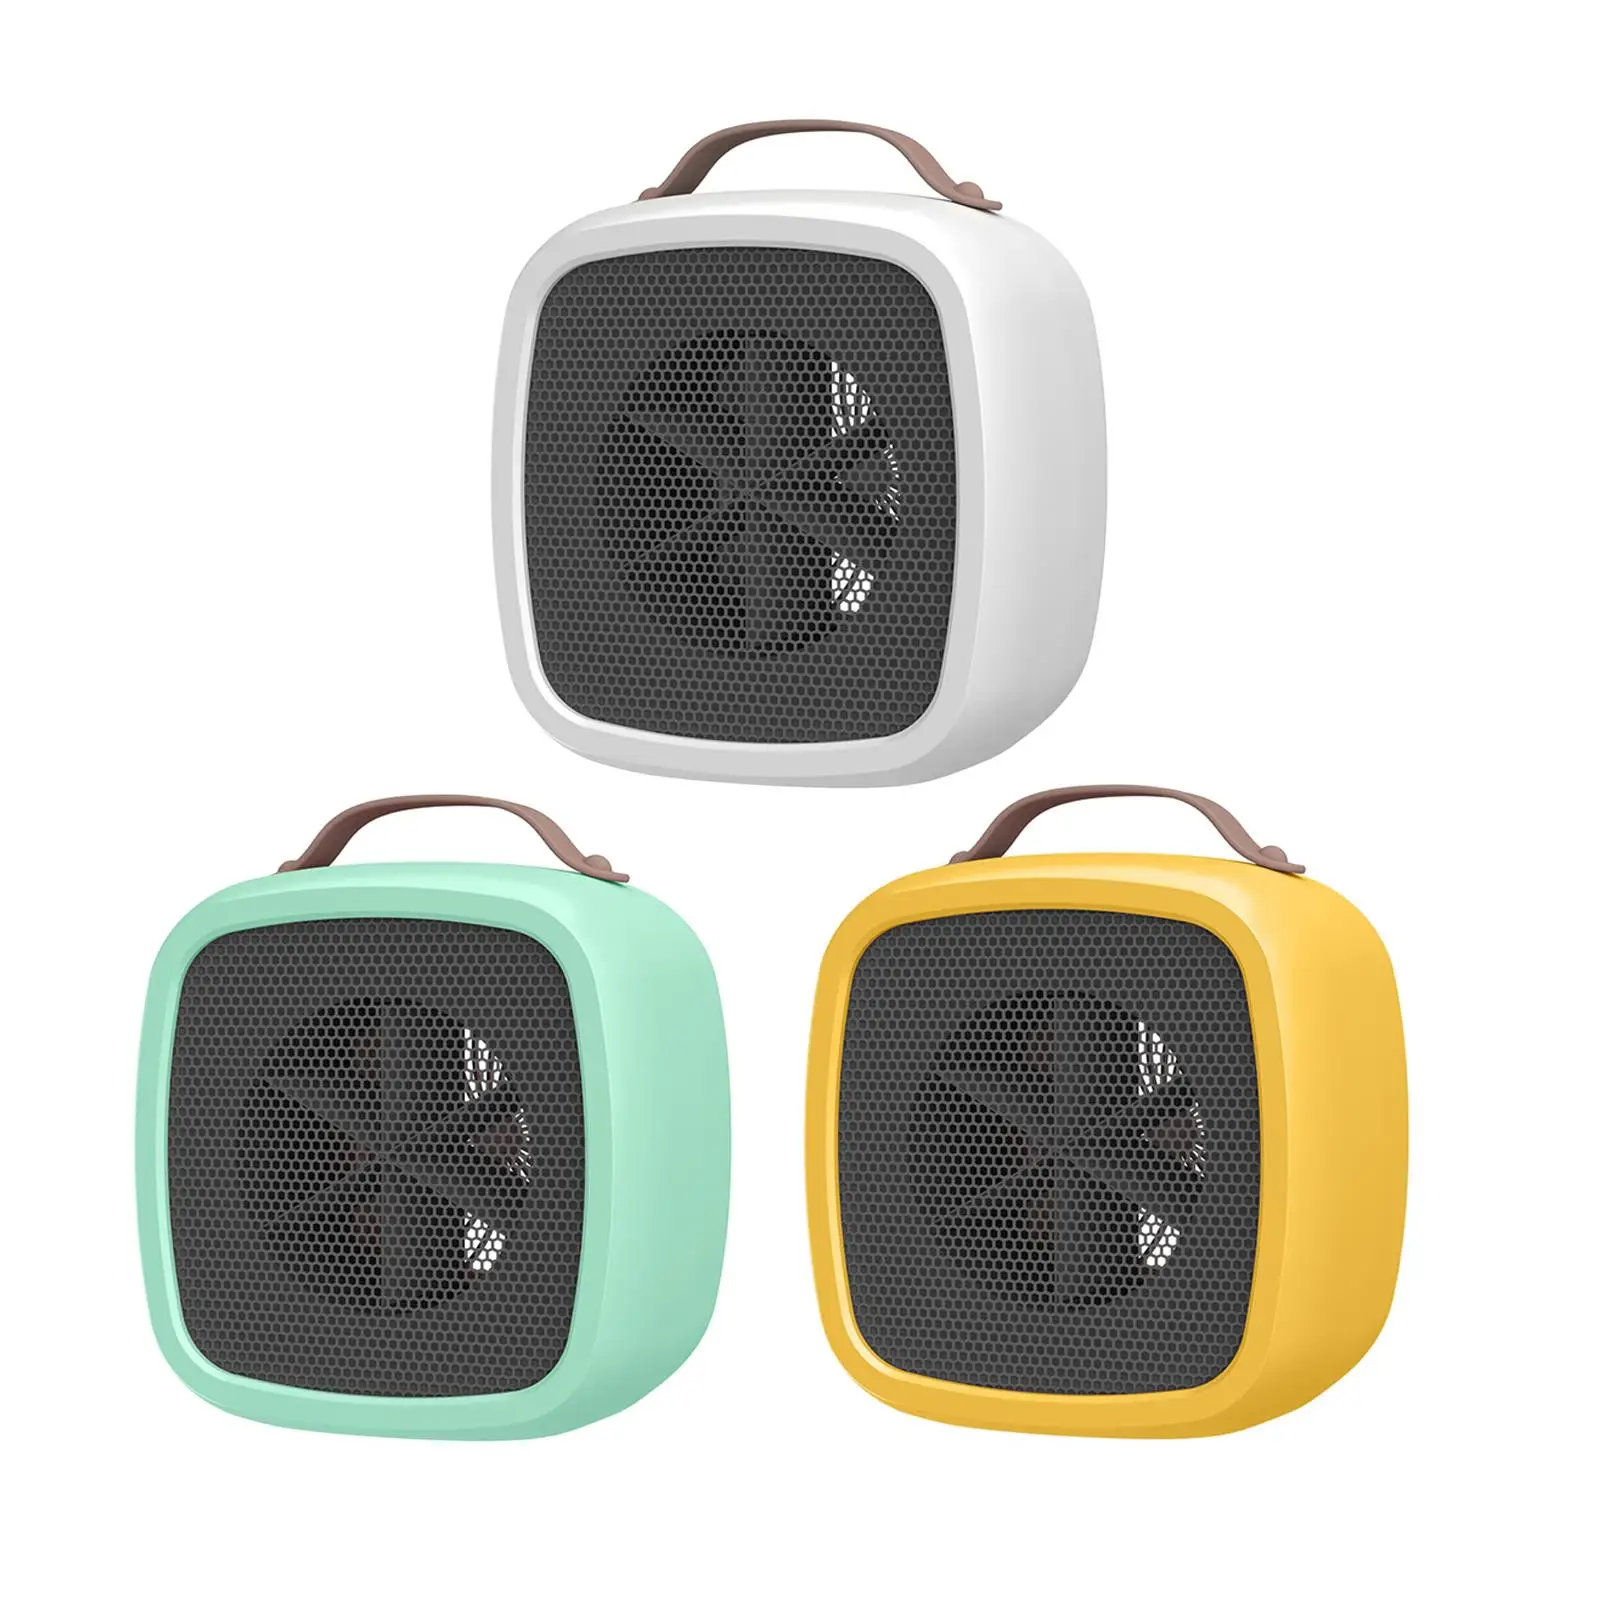 Portable Electric Heater Low Noise Warm Heating Fan 500W Gears Setting Winter Air Conditioner for Desktop Office Bedroom